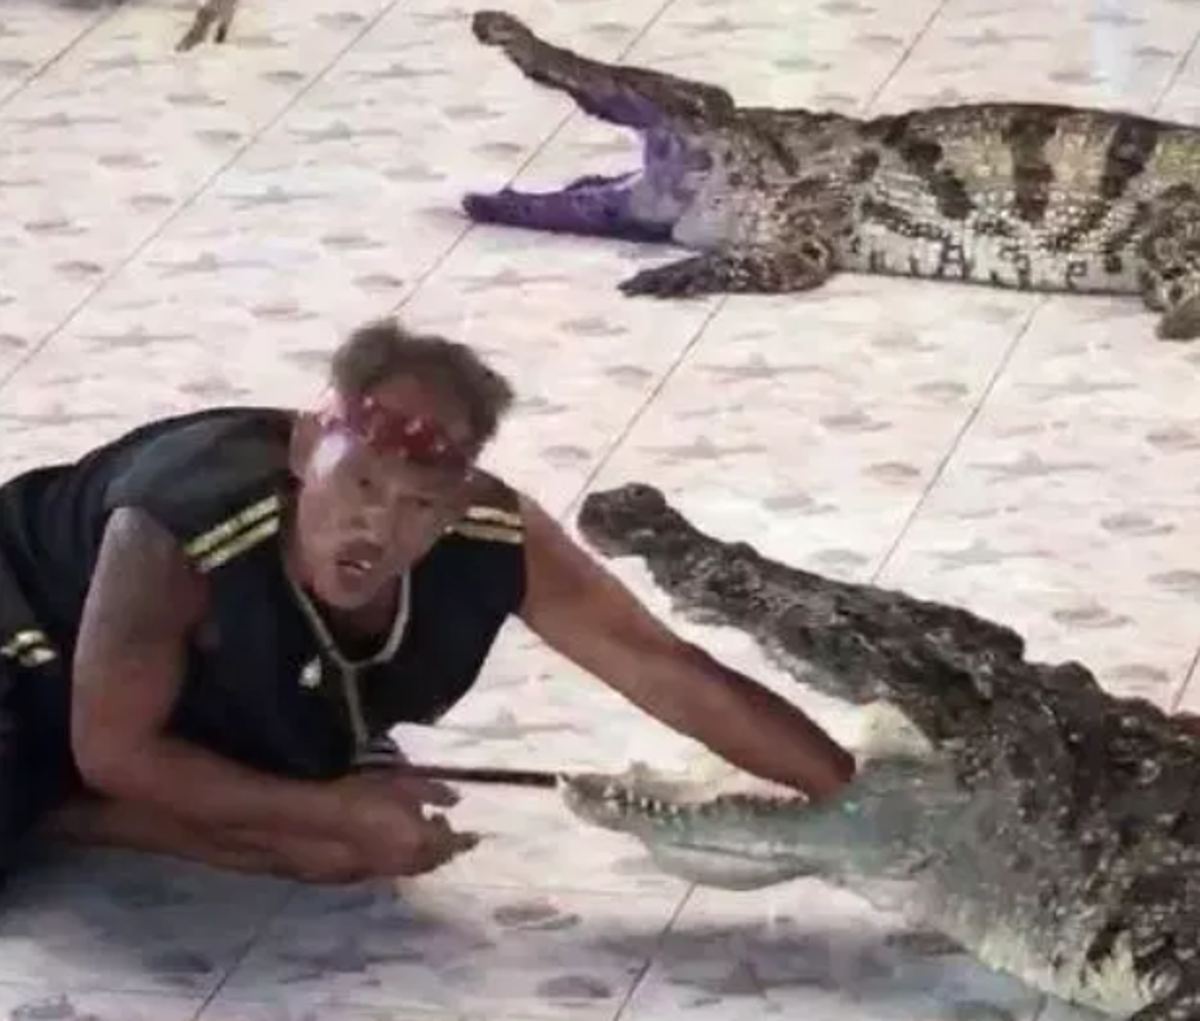 Thai Reptile Handler Gets Arm Bitten By Crocodile During A Live Show The Independent The 0492